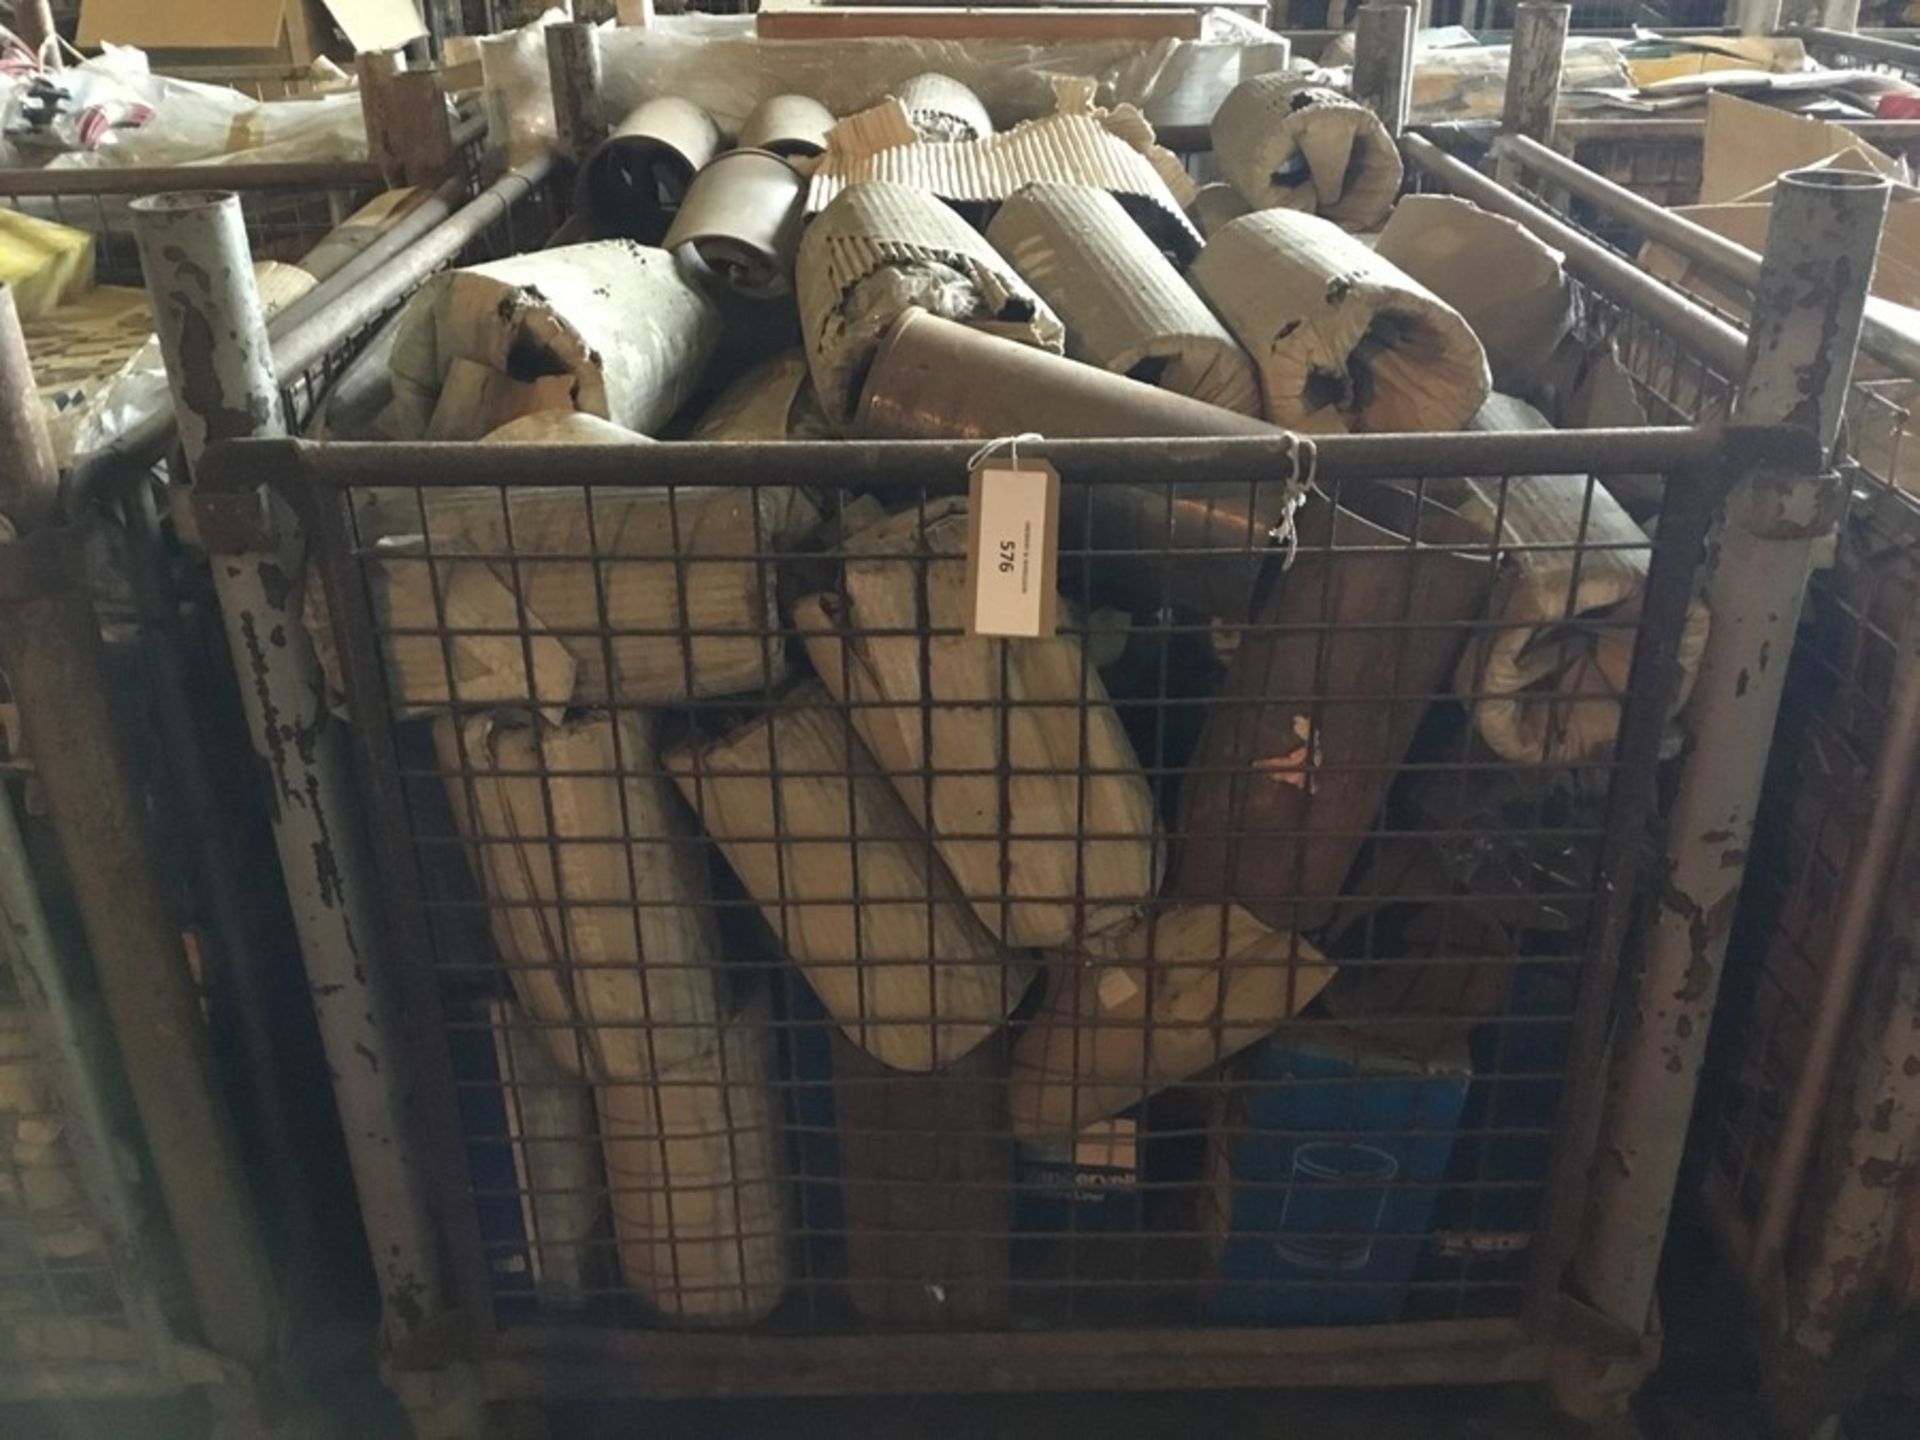 Cage containing Leyland liners cast